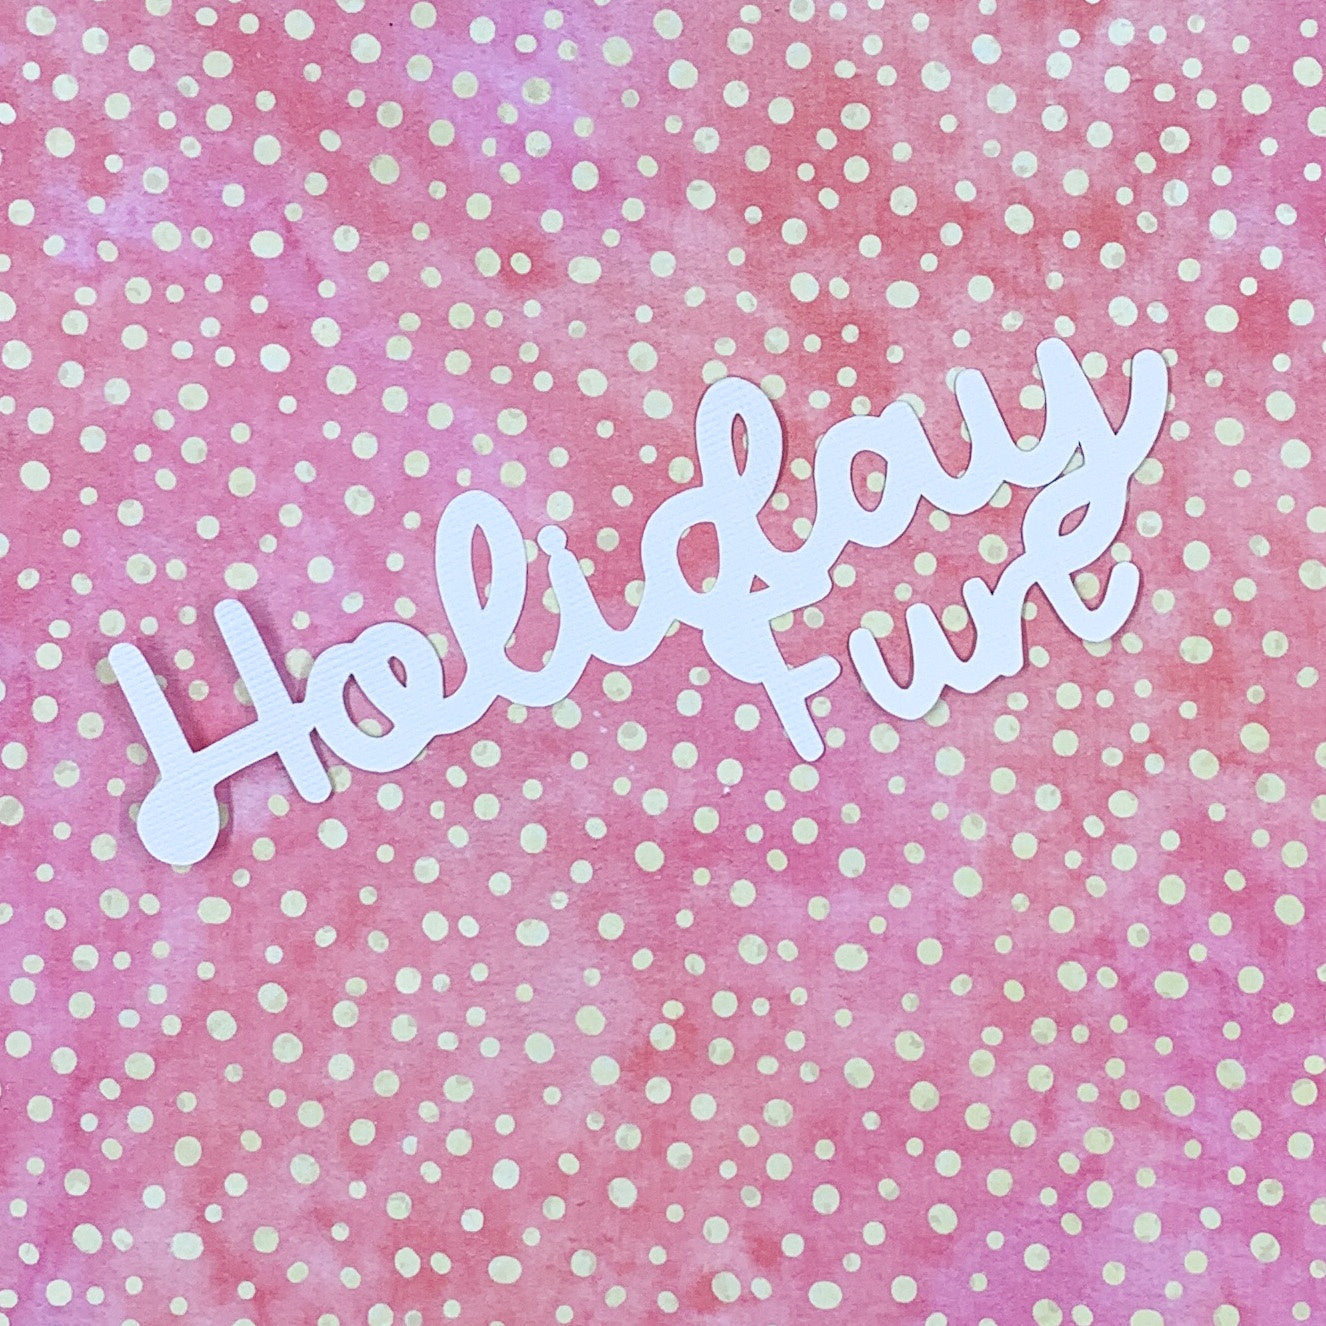 Tropicana - Holiday Fun 5.5"x2" White Linen Cardstock Title-Cut - Designed by Alicia Redshaw